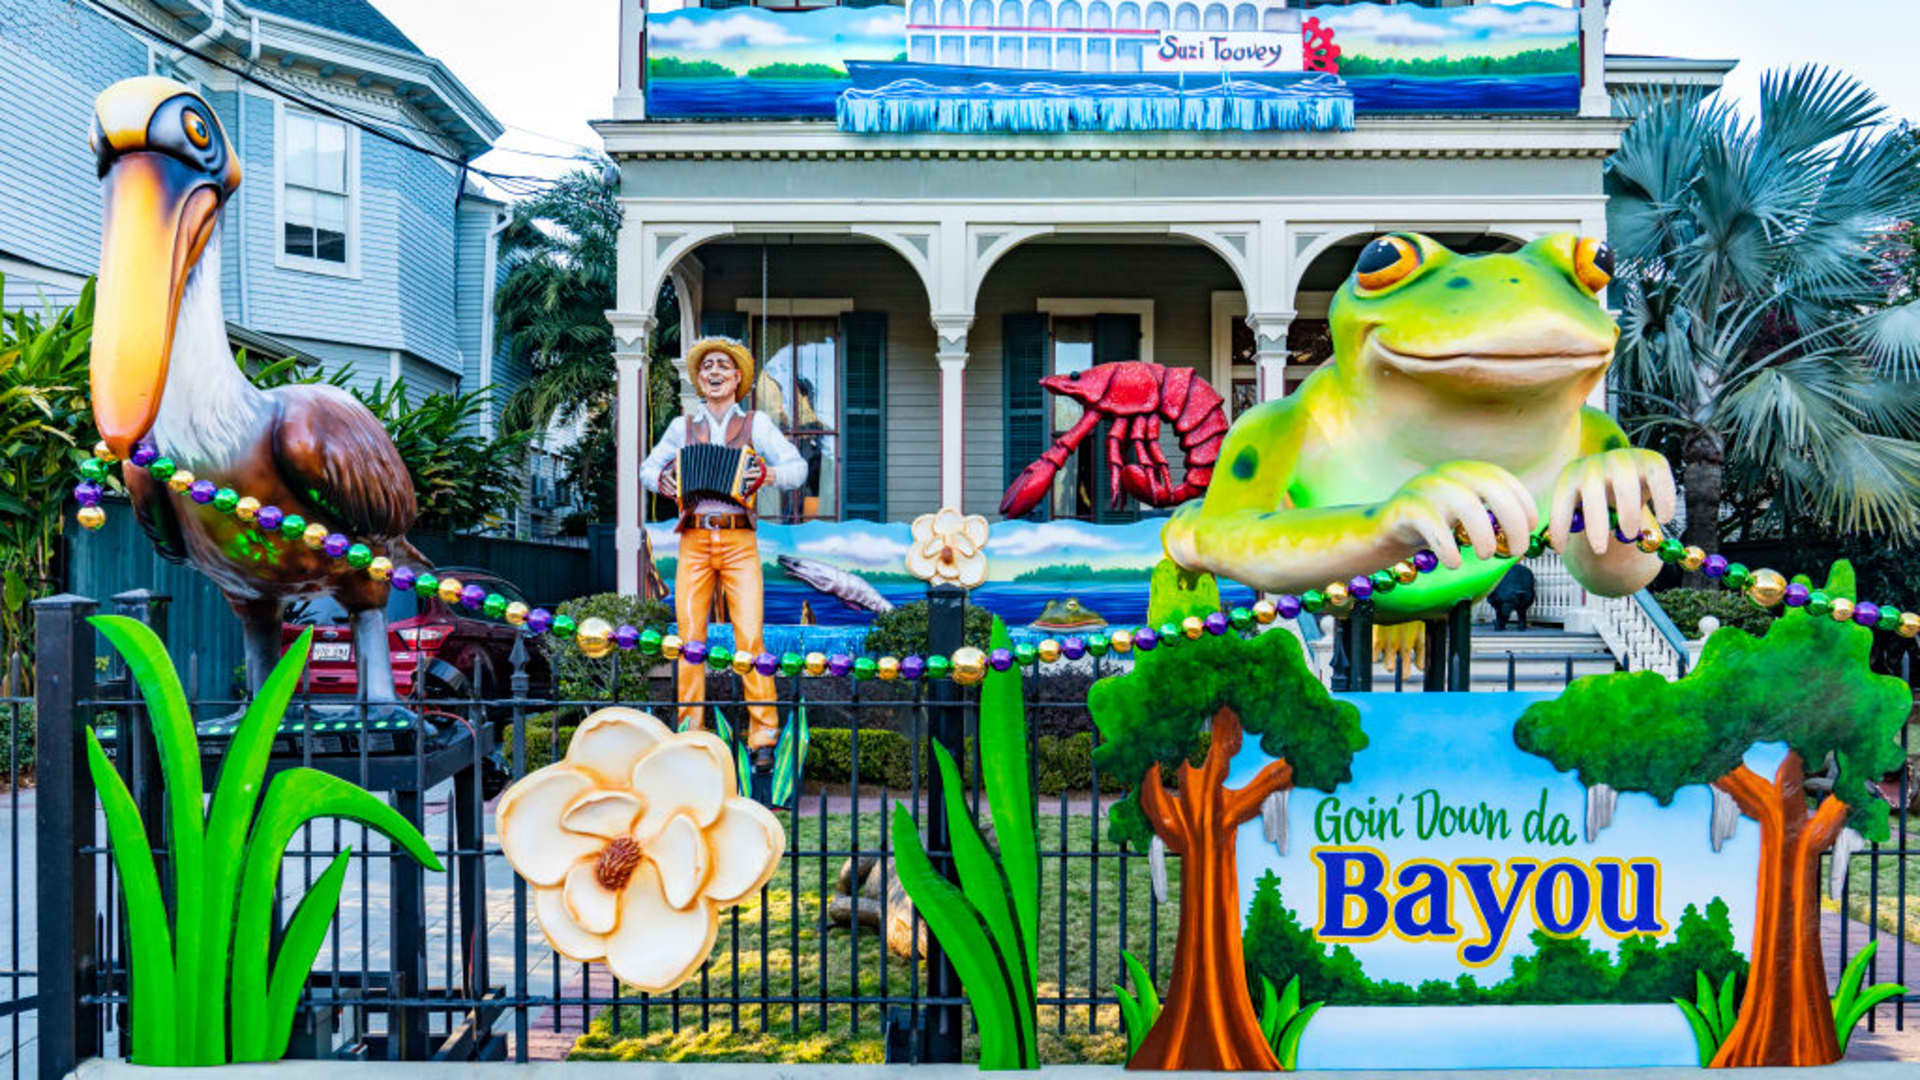 View of Goin Down Da Bayou house on February 07, 2021 in New Orleans, Louisiana. Due to the COVID-19 pandemic cancelling traditional Mardi Gras activities, New Orleanians are decorating their homes and businesses to resemble Mardi Gras floats.